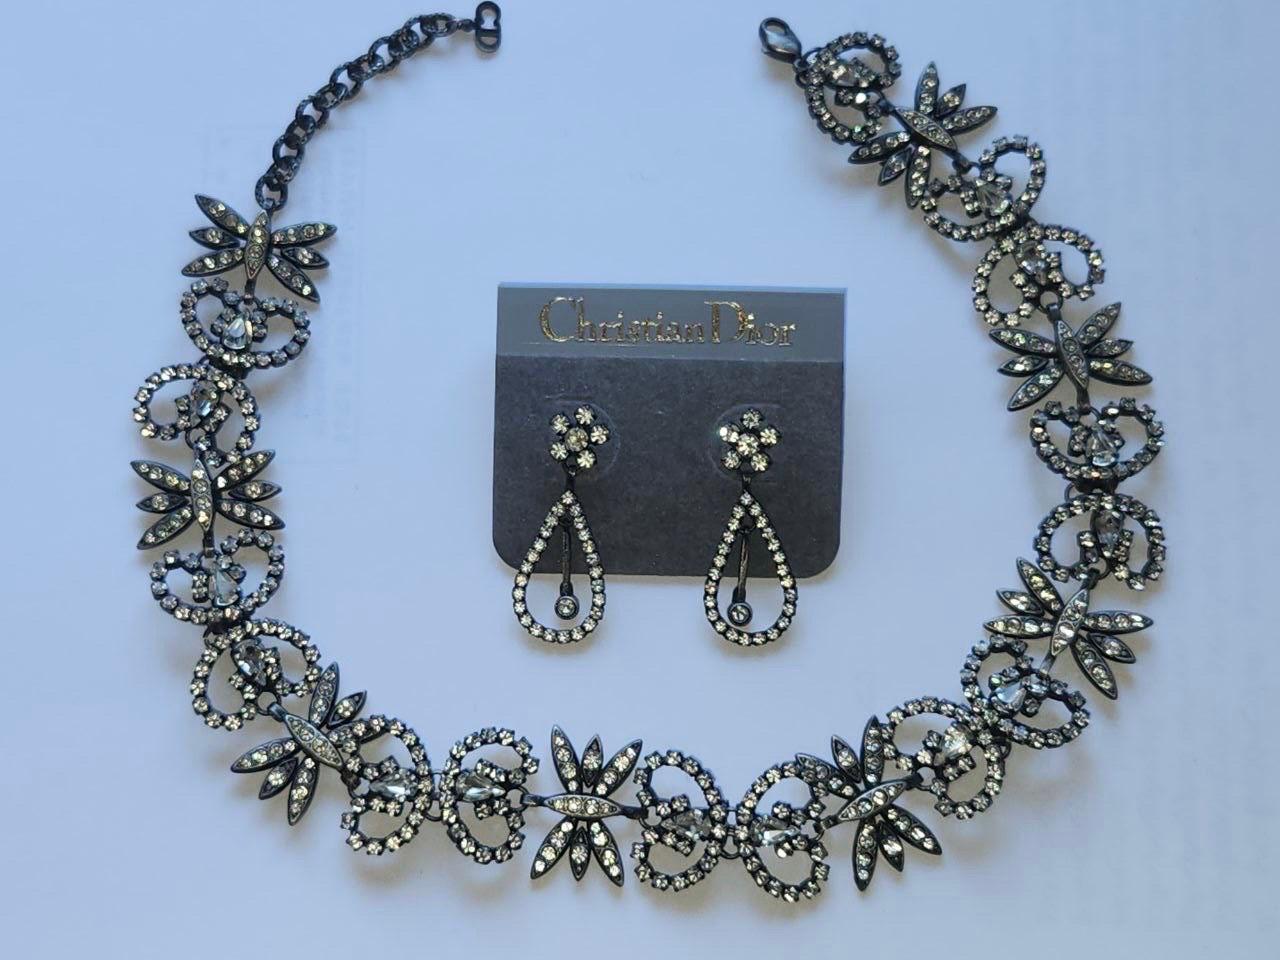 Vintage John Galliano for Christian Dior Haute Couture Necklace and Earrings Set
Circa 1997
Metal, Crystals
Dior Stamp
Total Length (with adjustable chain is 43 cm)
Width 2.5 cm
Earrings 4 cm
Excellent condition